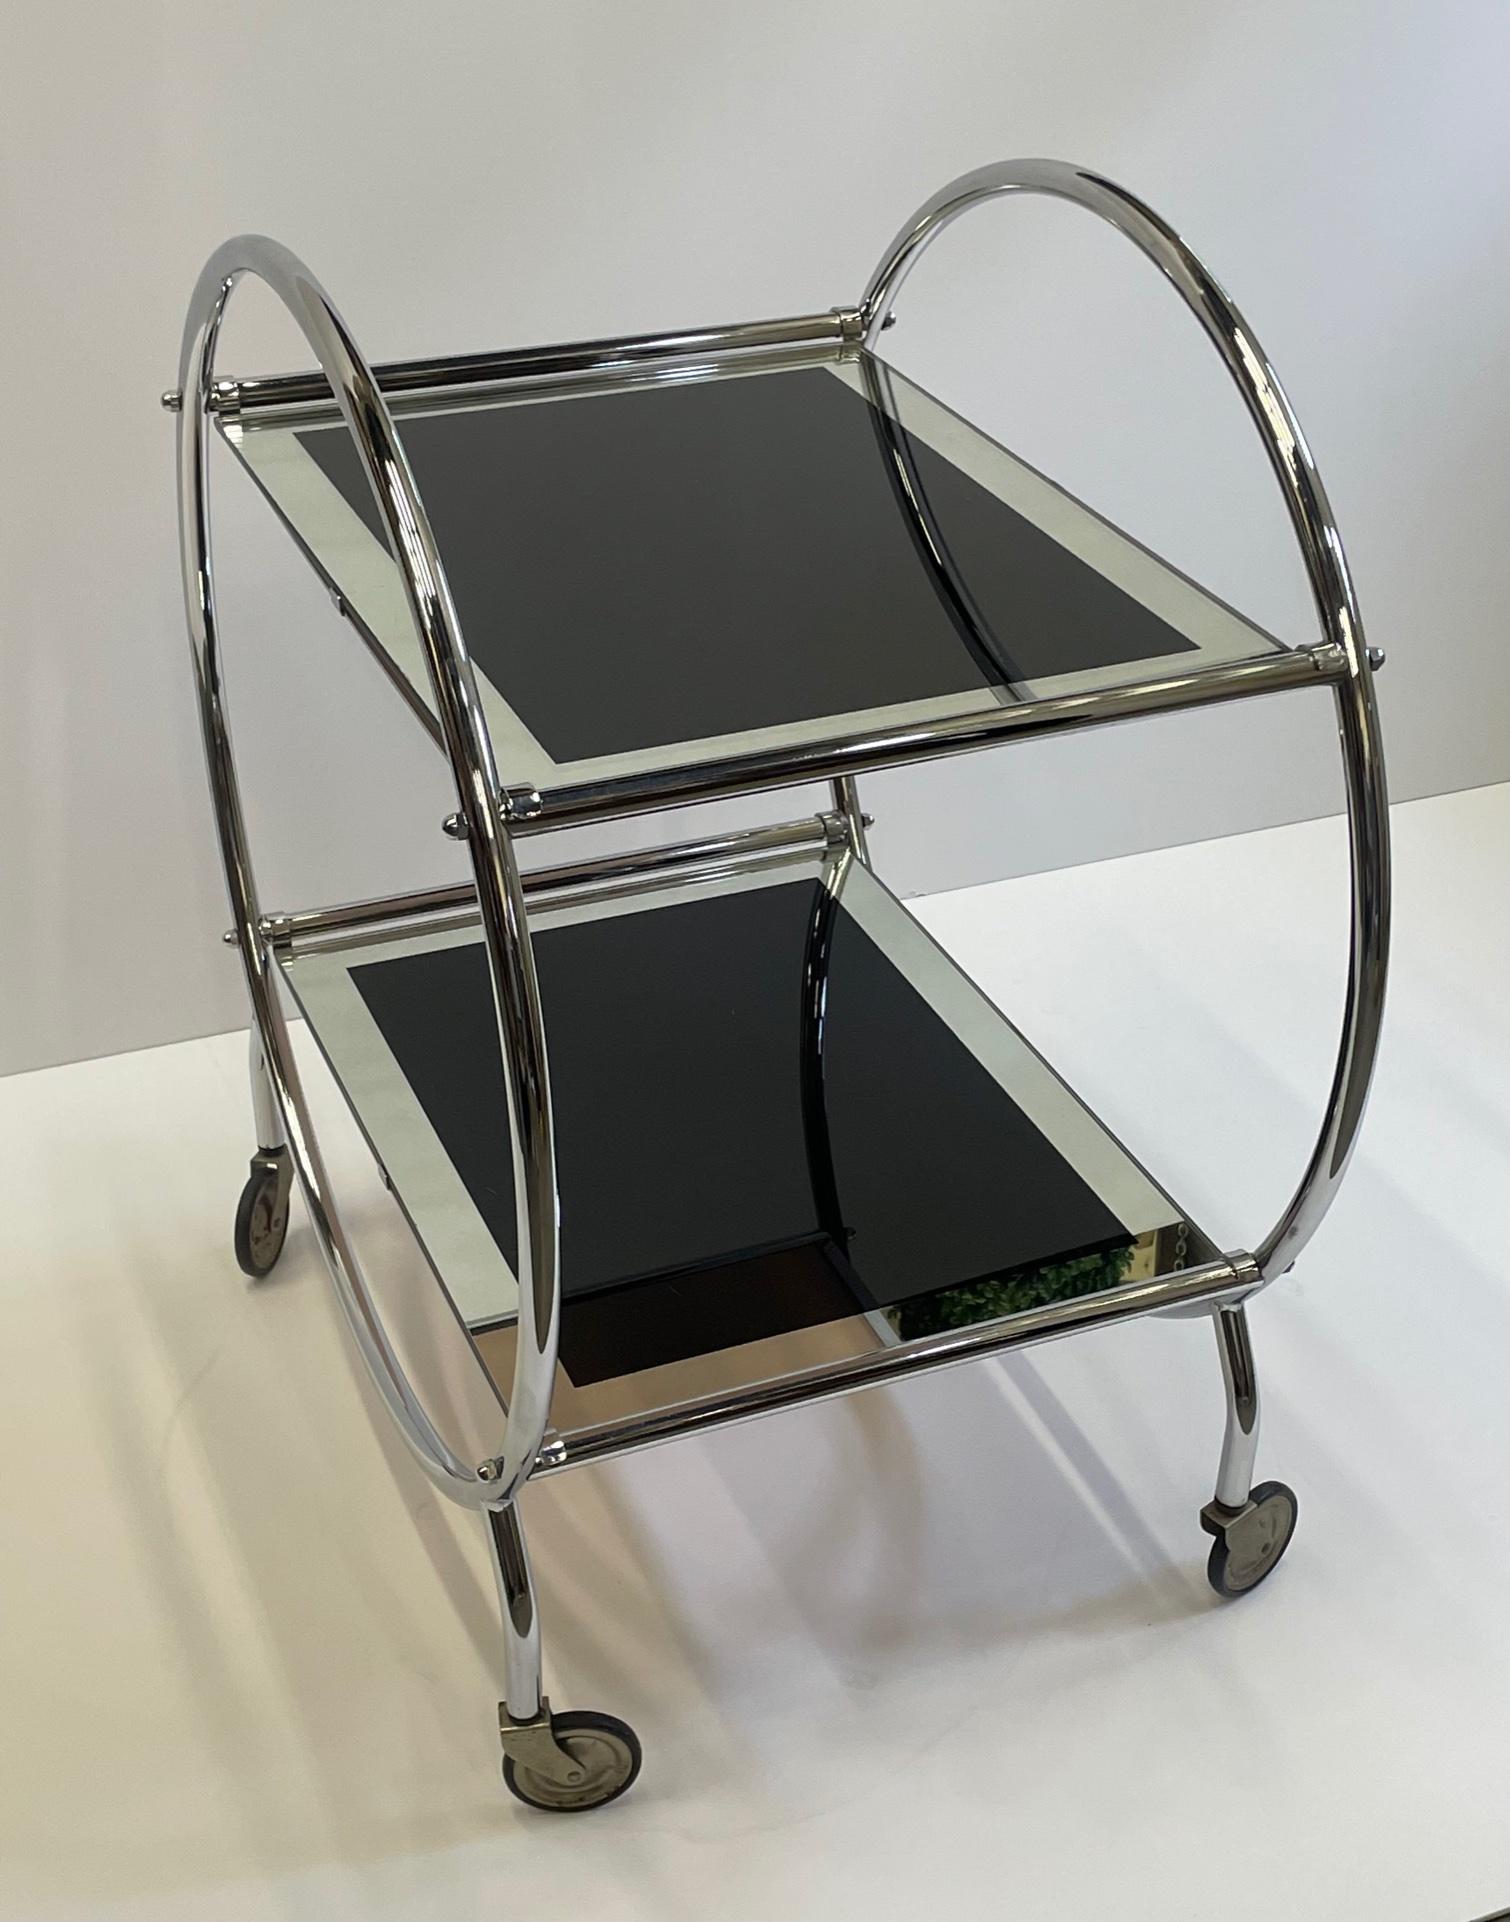 North American Sexy Mid Century Modern Chrome & Mirrored Bar Cart For Sale